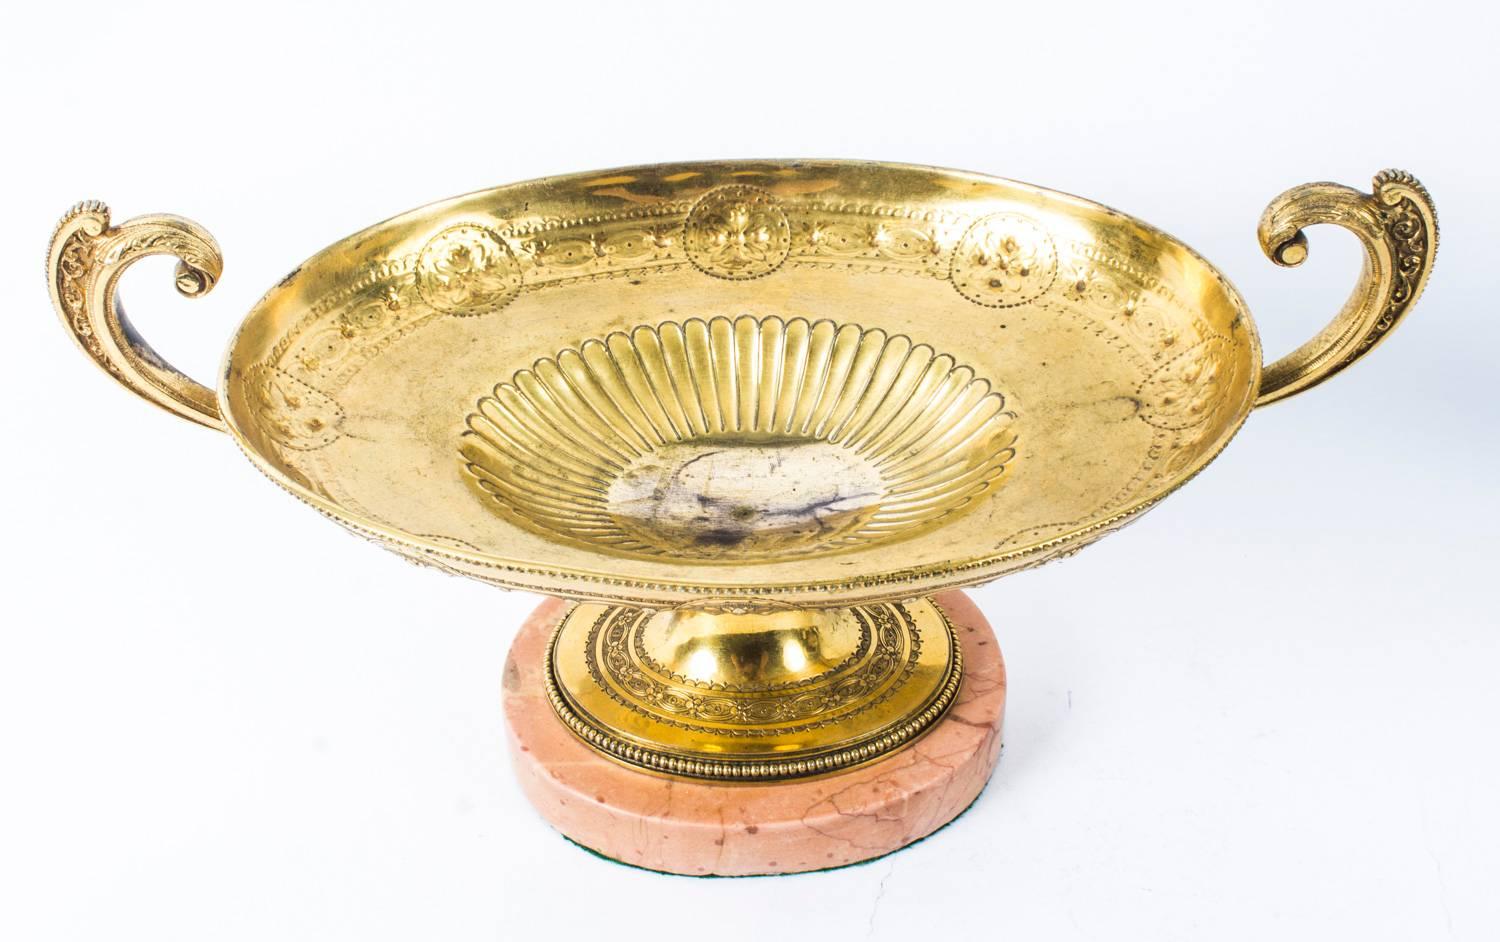 This is an elegant antique Grand Tour French neoclassical ormolu oval two-handled table centrepiece, circa 1870 in date.

This beautiful centrepiece in the form of an Athenian Kylix vase is half-fluted and embossed with paterae, the flying-scroll